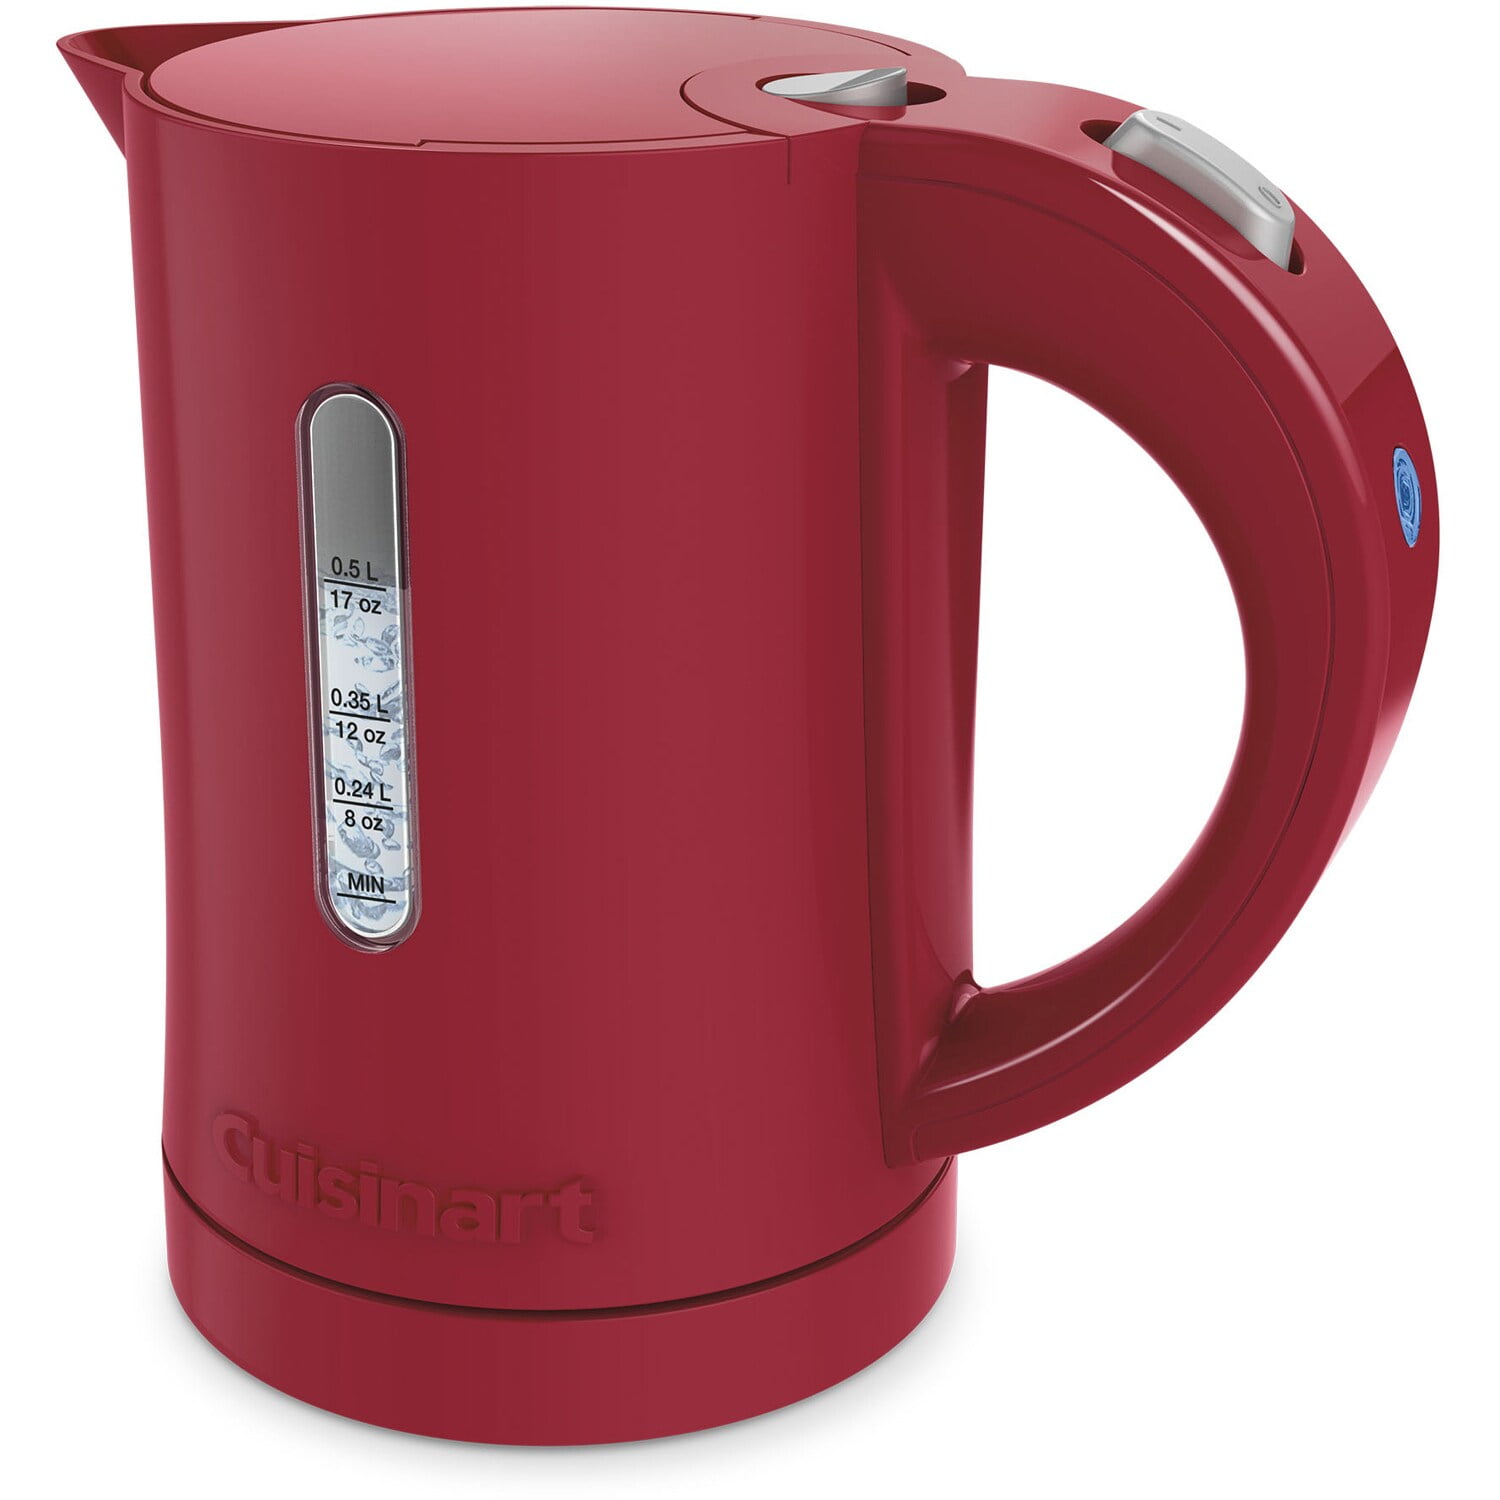 Cuisinart CK-5R 086279100498 CK-5W Electric QuicKettle, 0.5L/17OZ One Size,  Red 